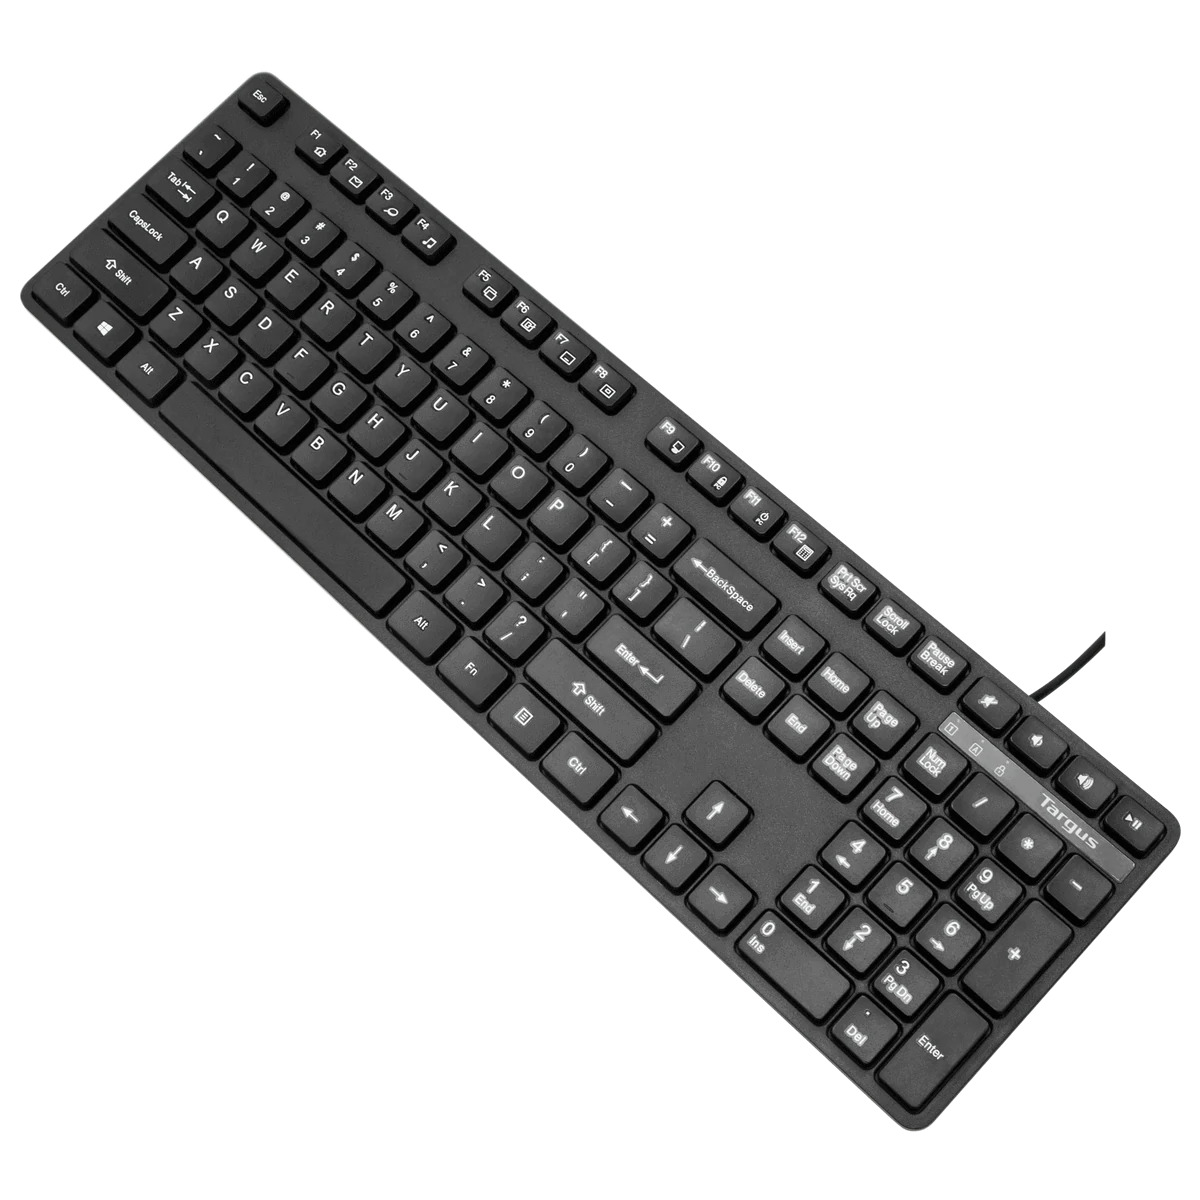 Targus Corporate Usb Wired Keyboard & Mouse Bundle